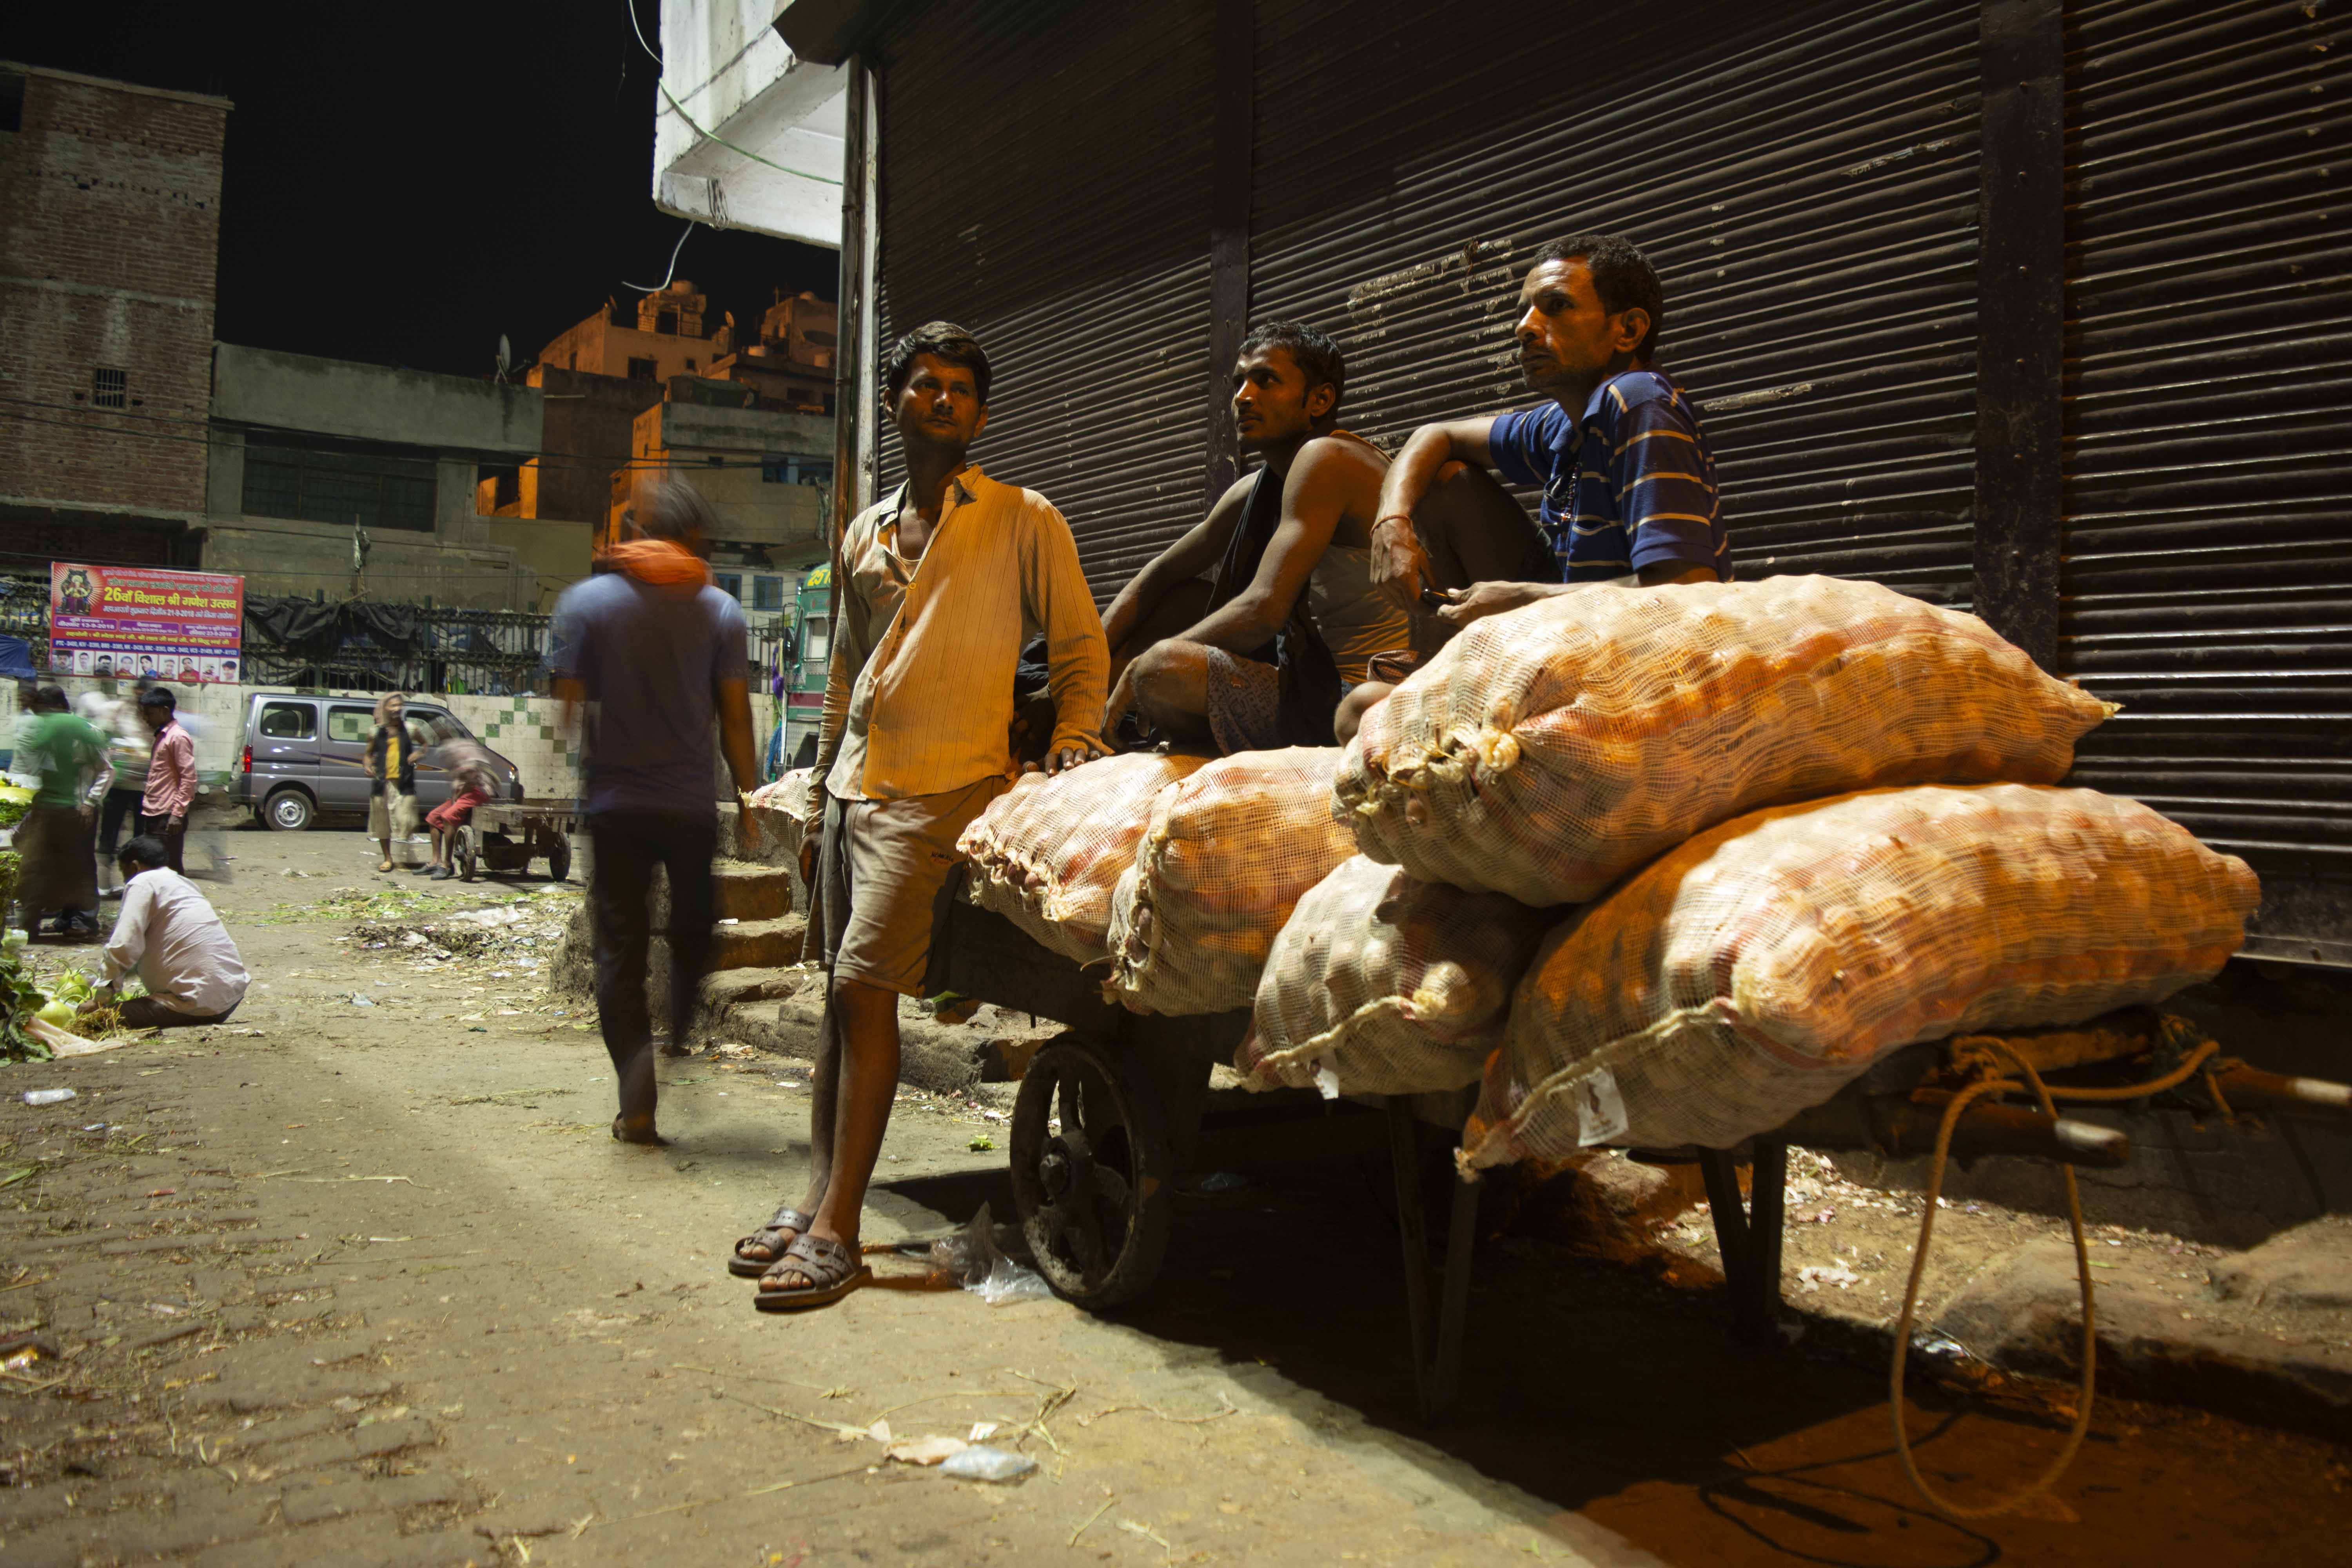 These daily wagers are safekeeping the vegetable sacks and the waiting for the people to load it back to the trucks for transportation.